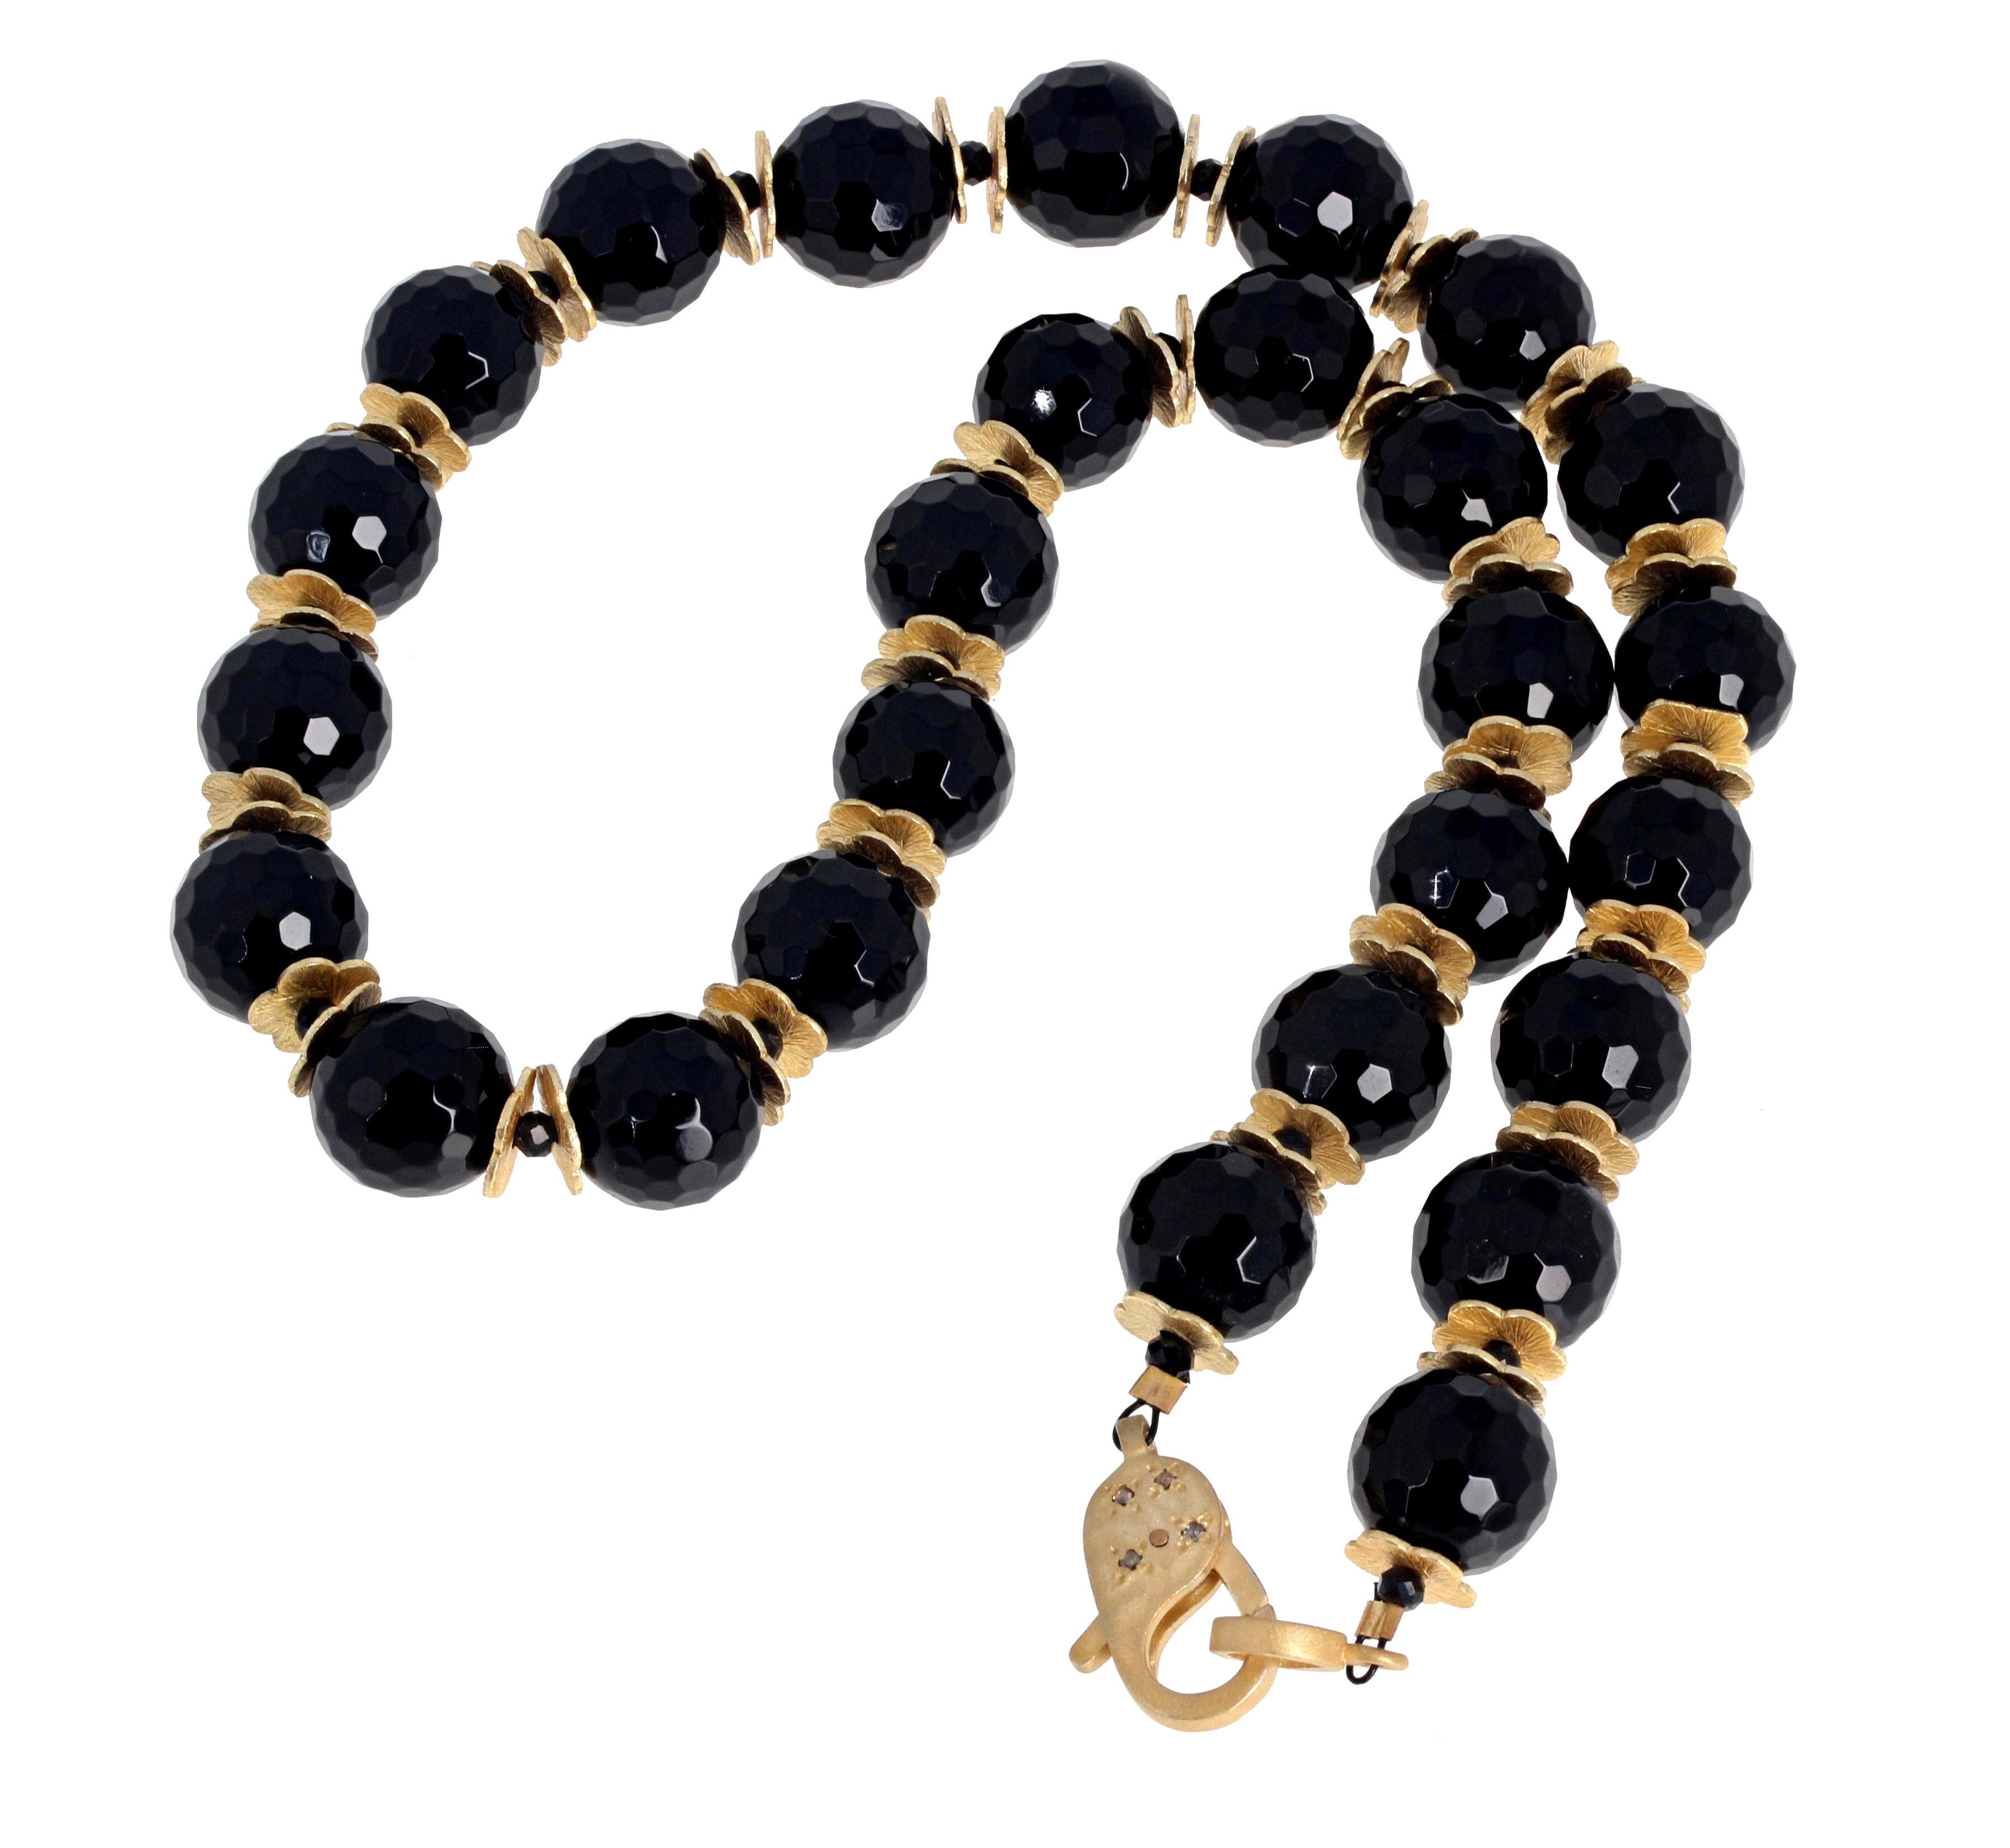 Superbly elegant 12.5mm glittering natural Black Onyx are enhanced with sparkling tiny little black Spinel between the gold plated rondels in the 17 1/2 inch long necklace.  The clasp is gold plated sterling silver encrusted with tiny little real